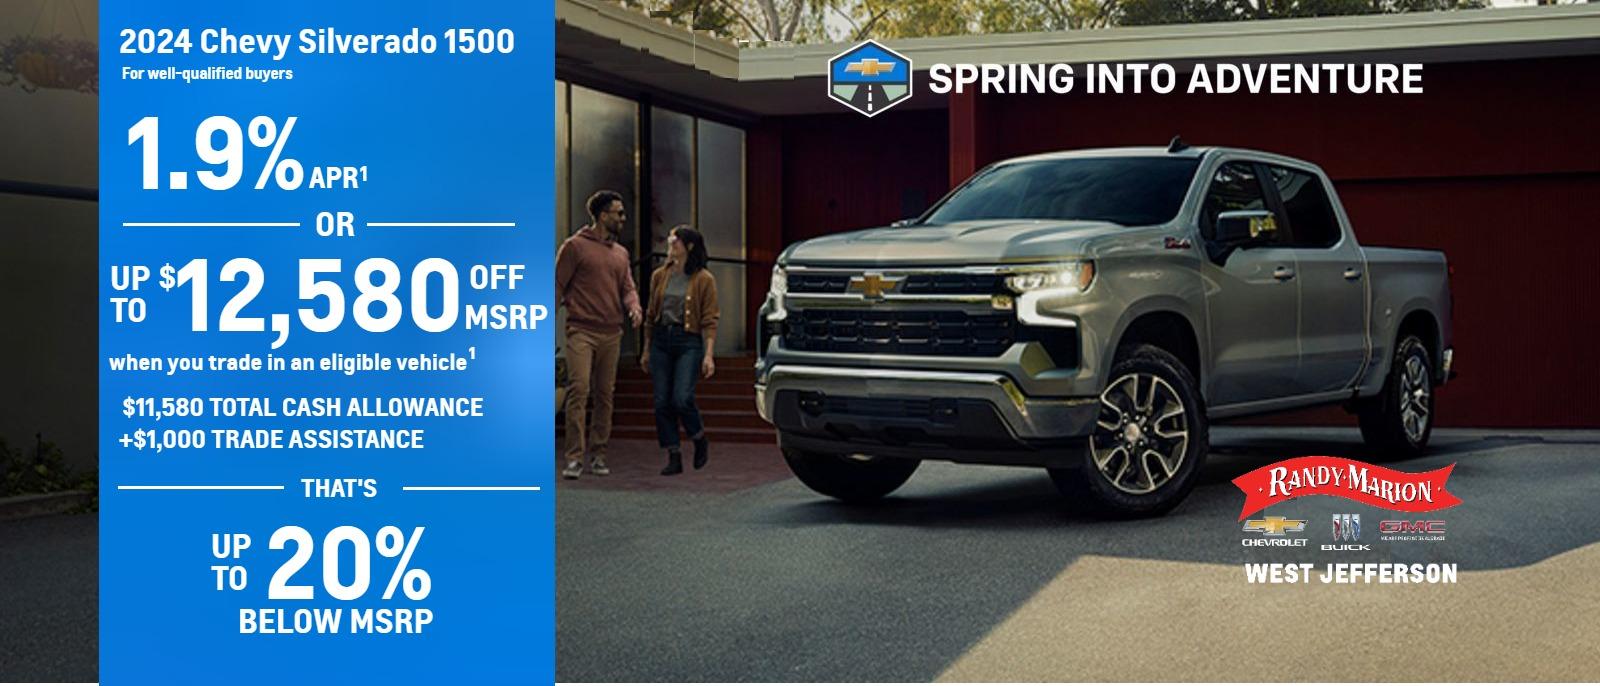 SAVE BIG ON THE CHEVROLET SILVERADO 1500 MODELS AT RANDY MARION CHEVROLET BUICK GMC OF WEST JEFFERSON